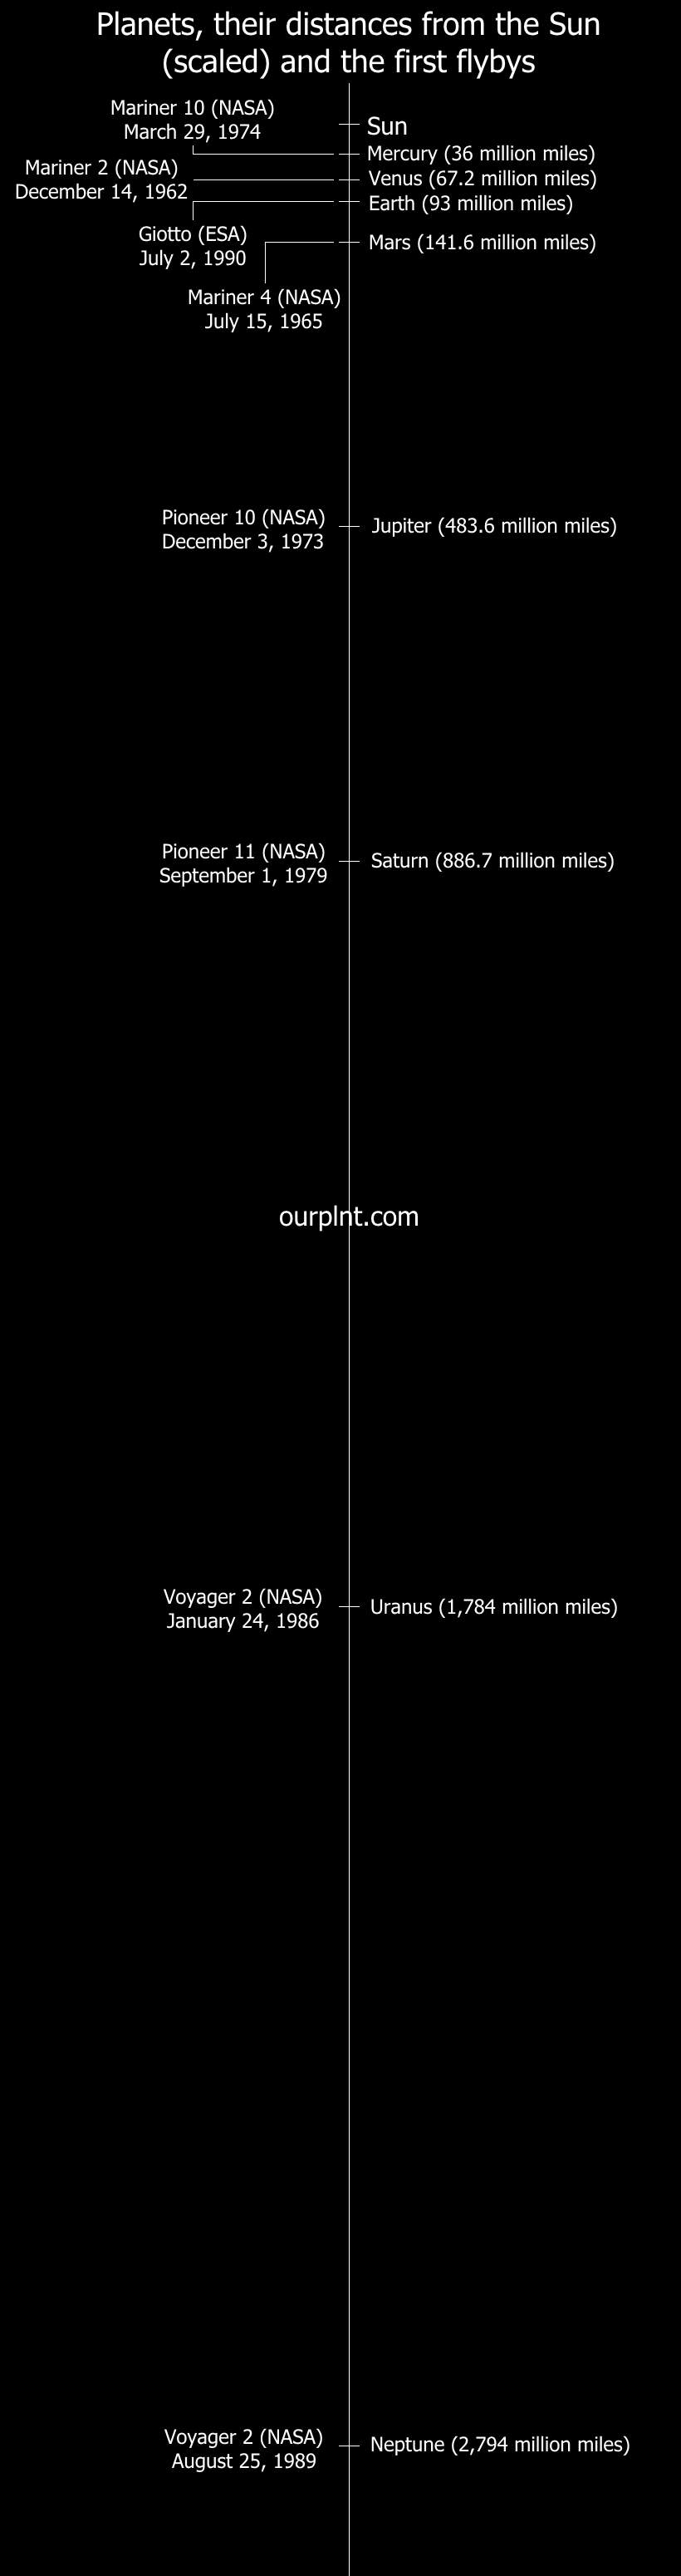 Scale of the Solar System and the first flybys of planets